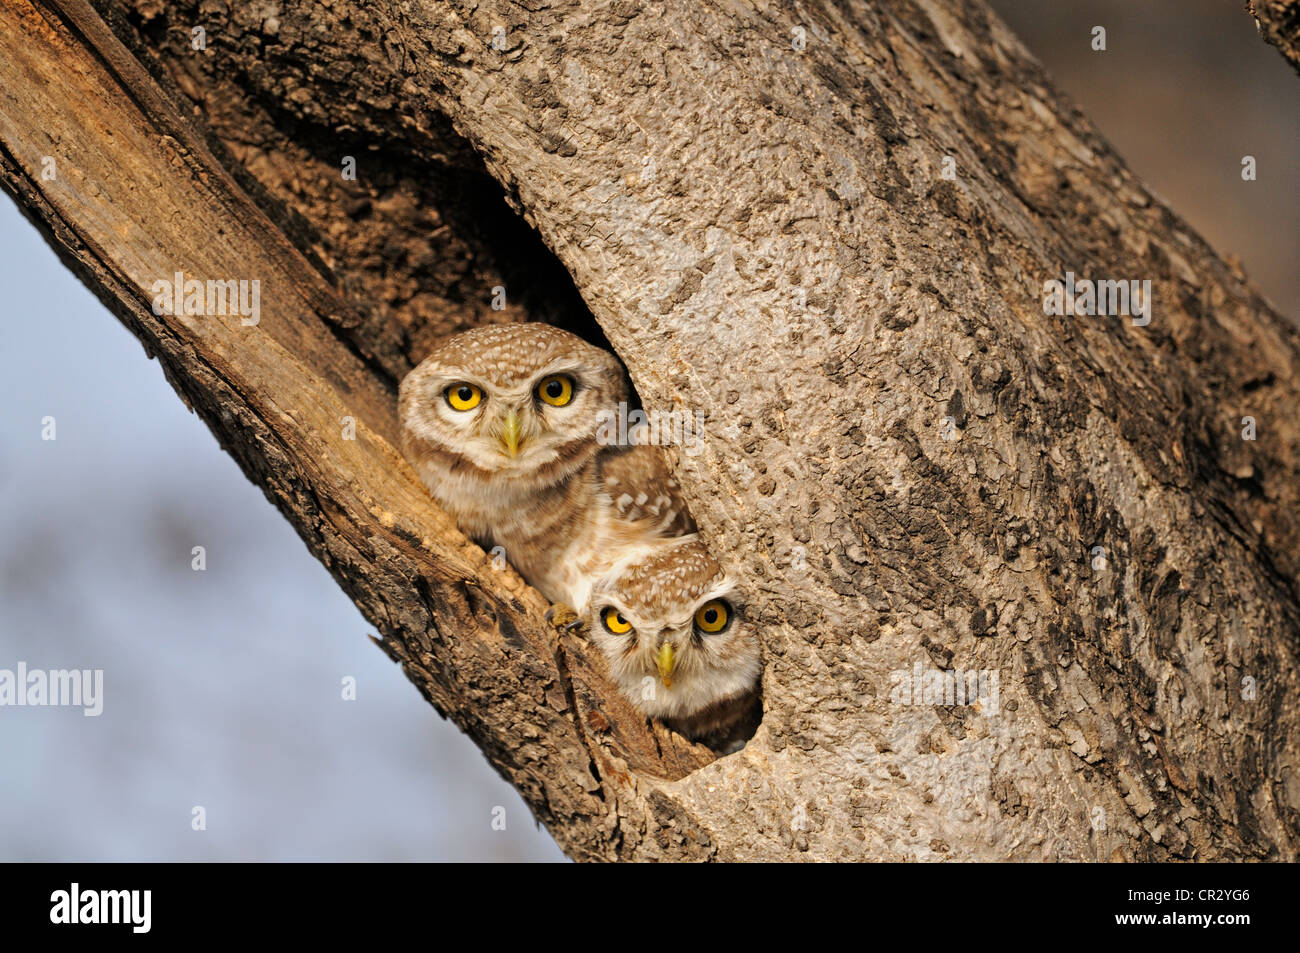 Two Spotted Owlets (Athene brama) staring from their tree hole in Ranthambore Tiger Reserve, Ranthambore National Park Stock Photo